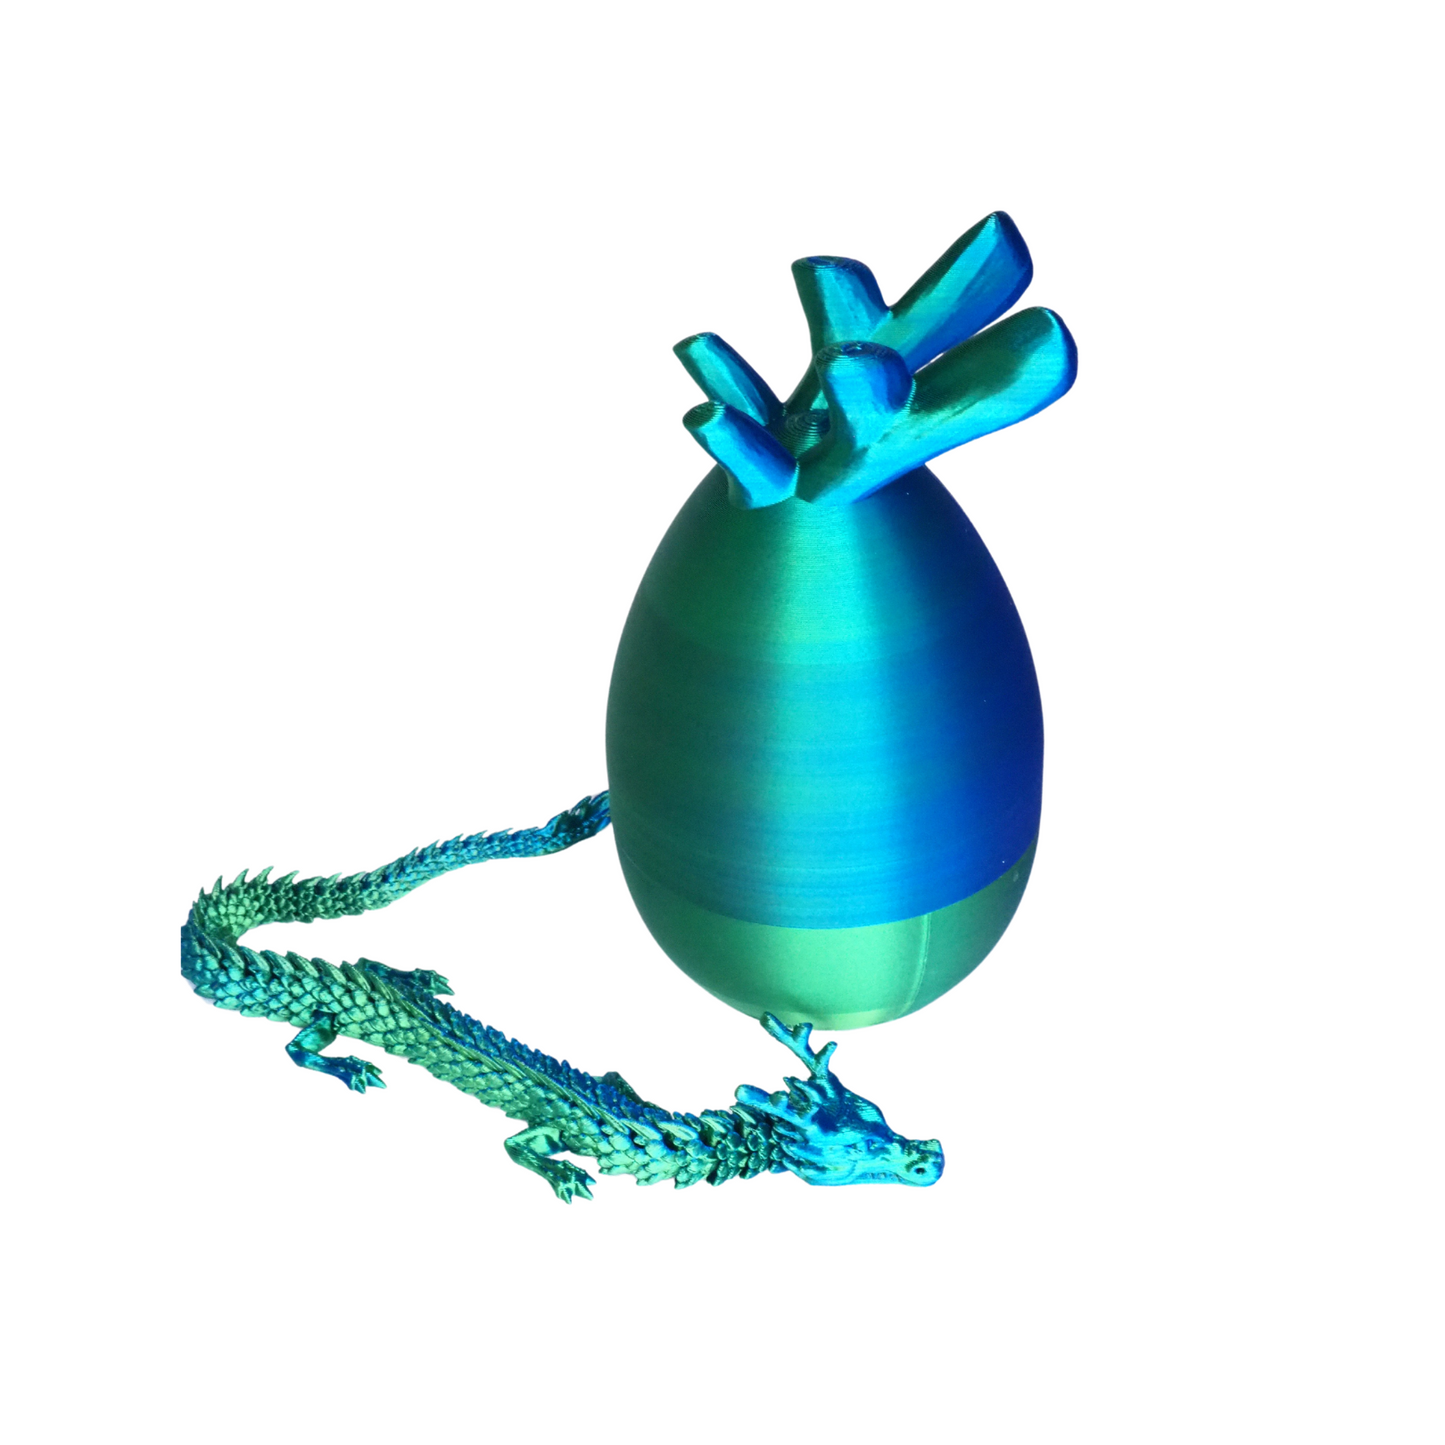 3D Printed Dragon Egg Toy, Dragon Eggs with Full Articulated Dragon Inside